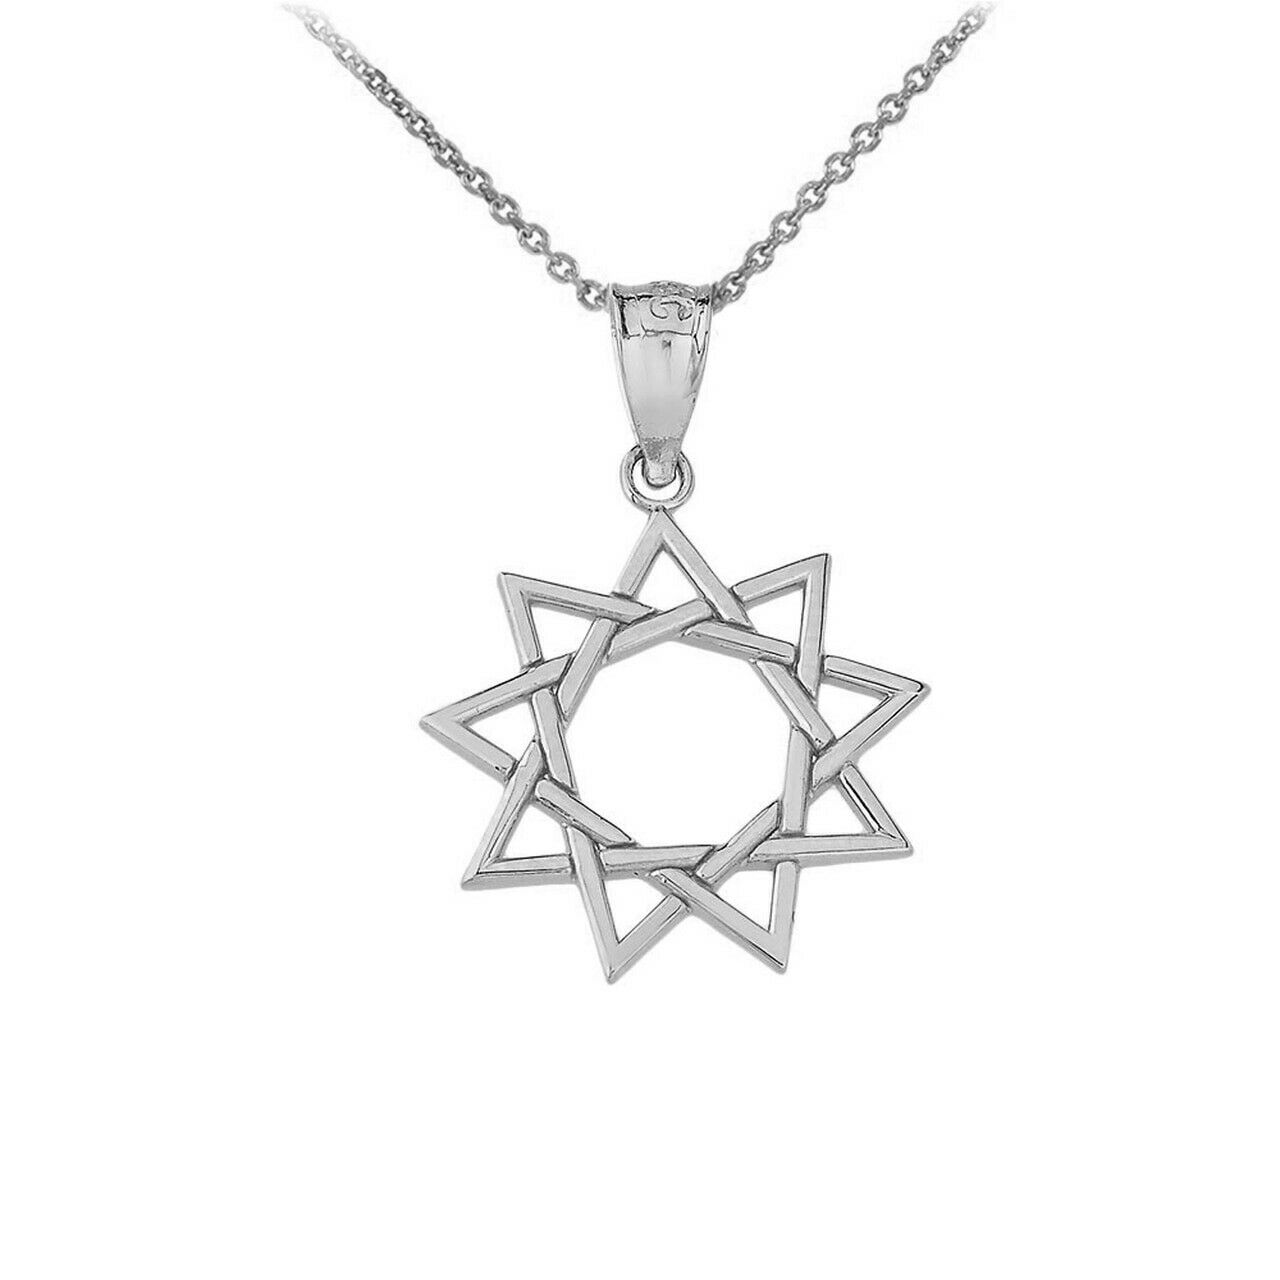 Solid 14k White Gold 9 Star Baha'i Sun Openwork Pendant Necklace